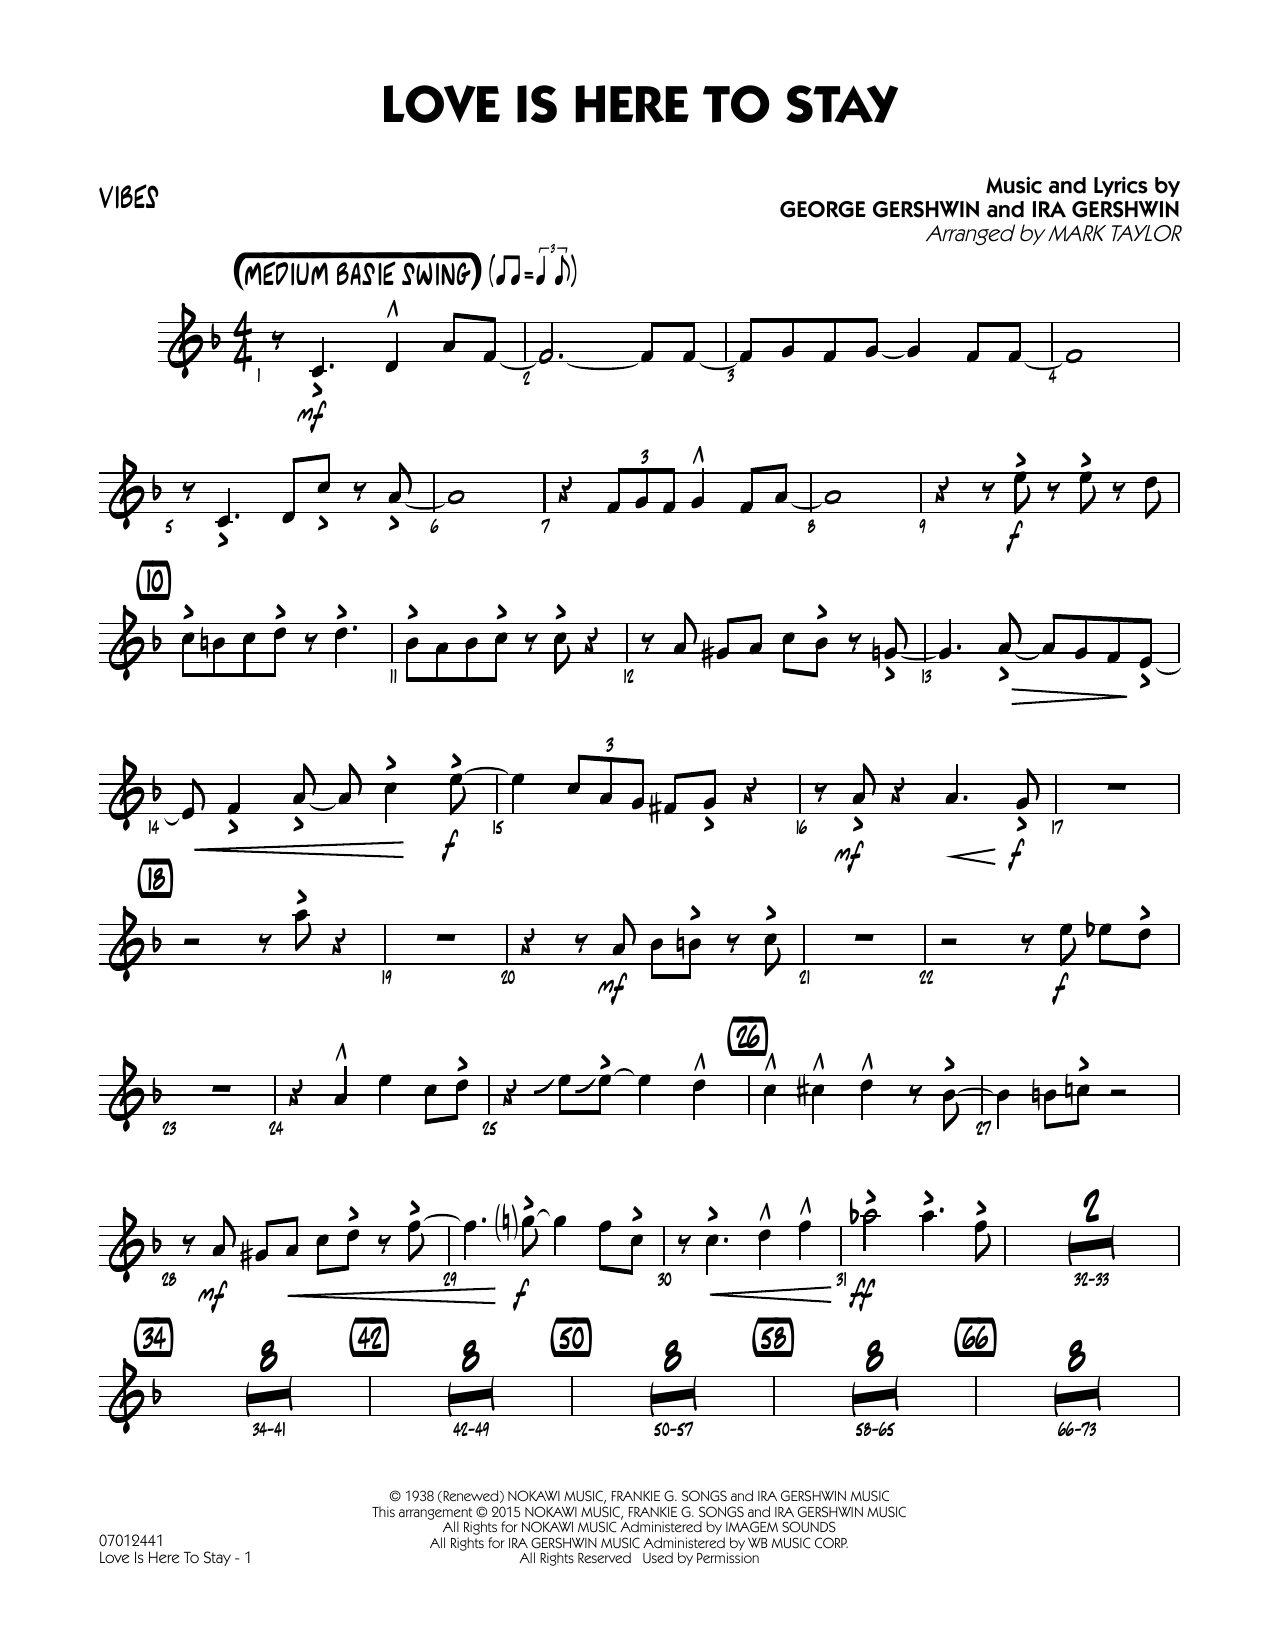 Mark Taylor Love Is Here to Stay - Vibes sheet music notes and chords. Download Printable PDF.